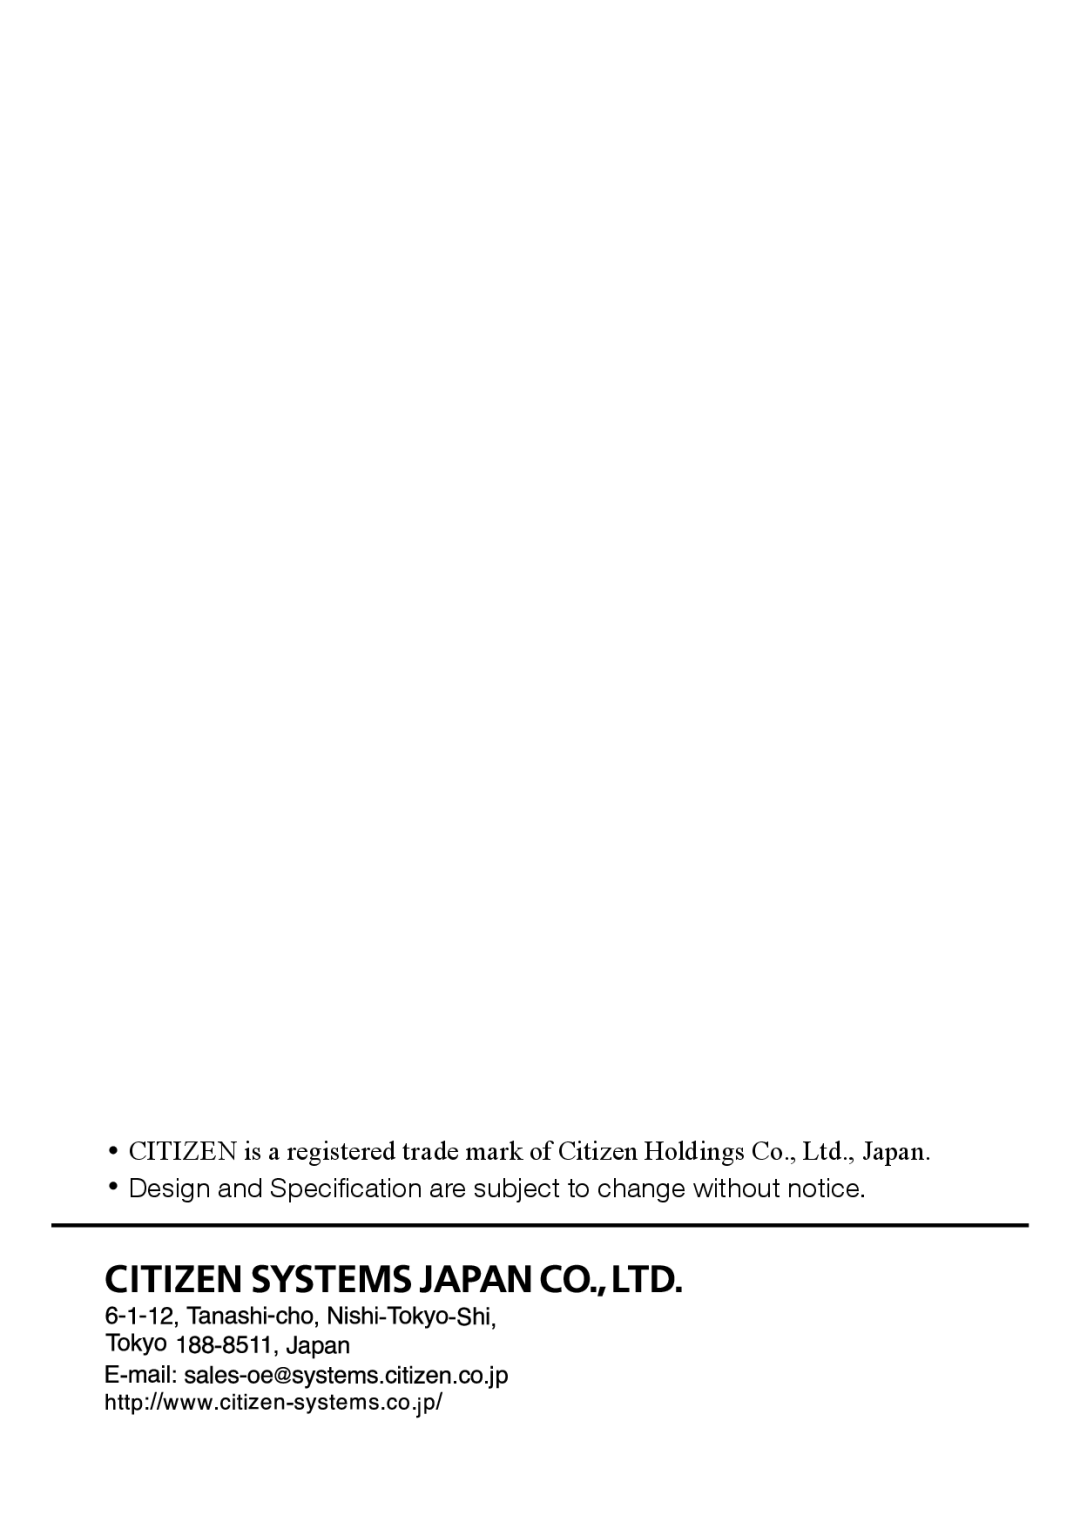 Citizen CH-453 instruction manual Design and Speciﬁcation are subject to change without notice 